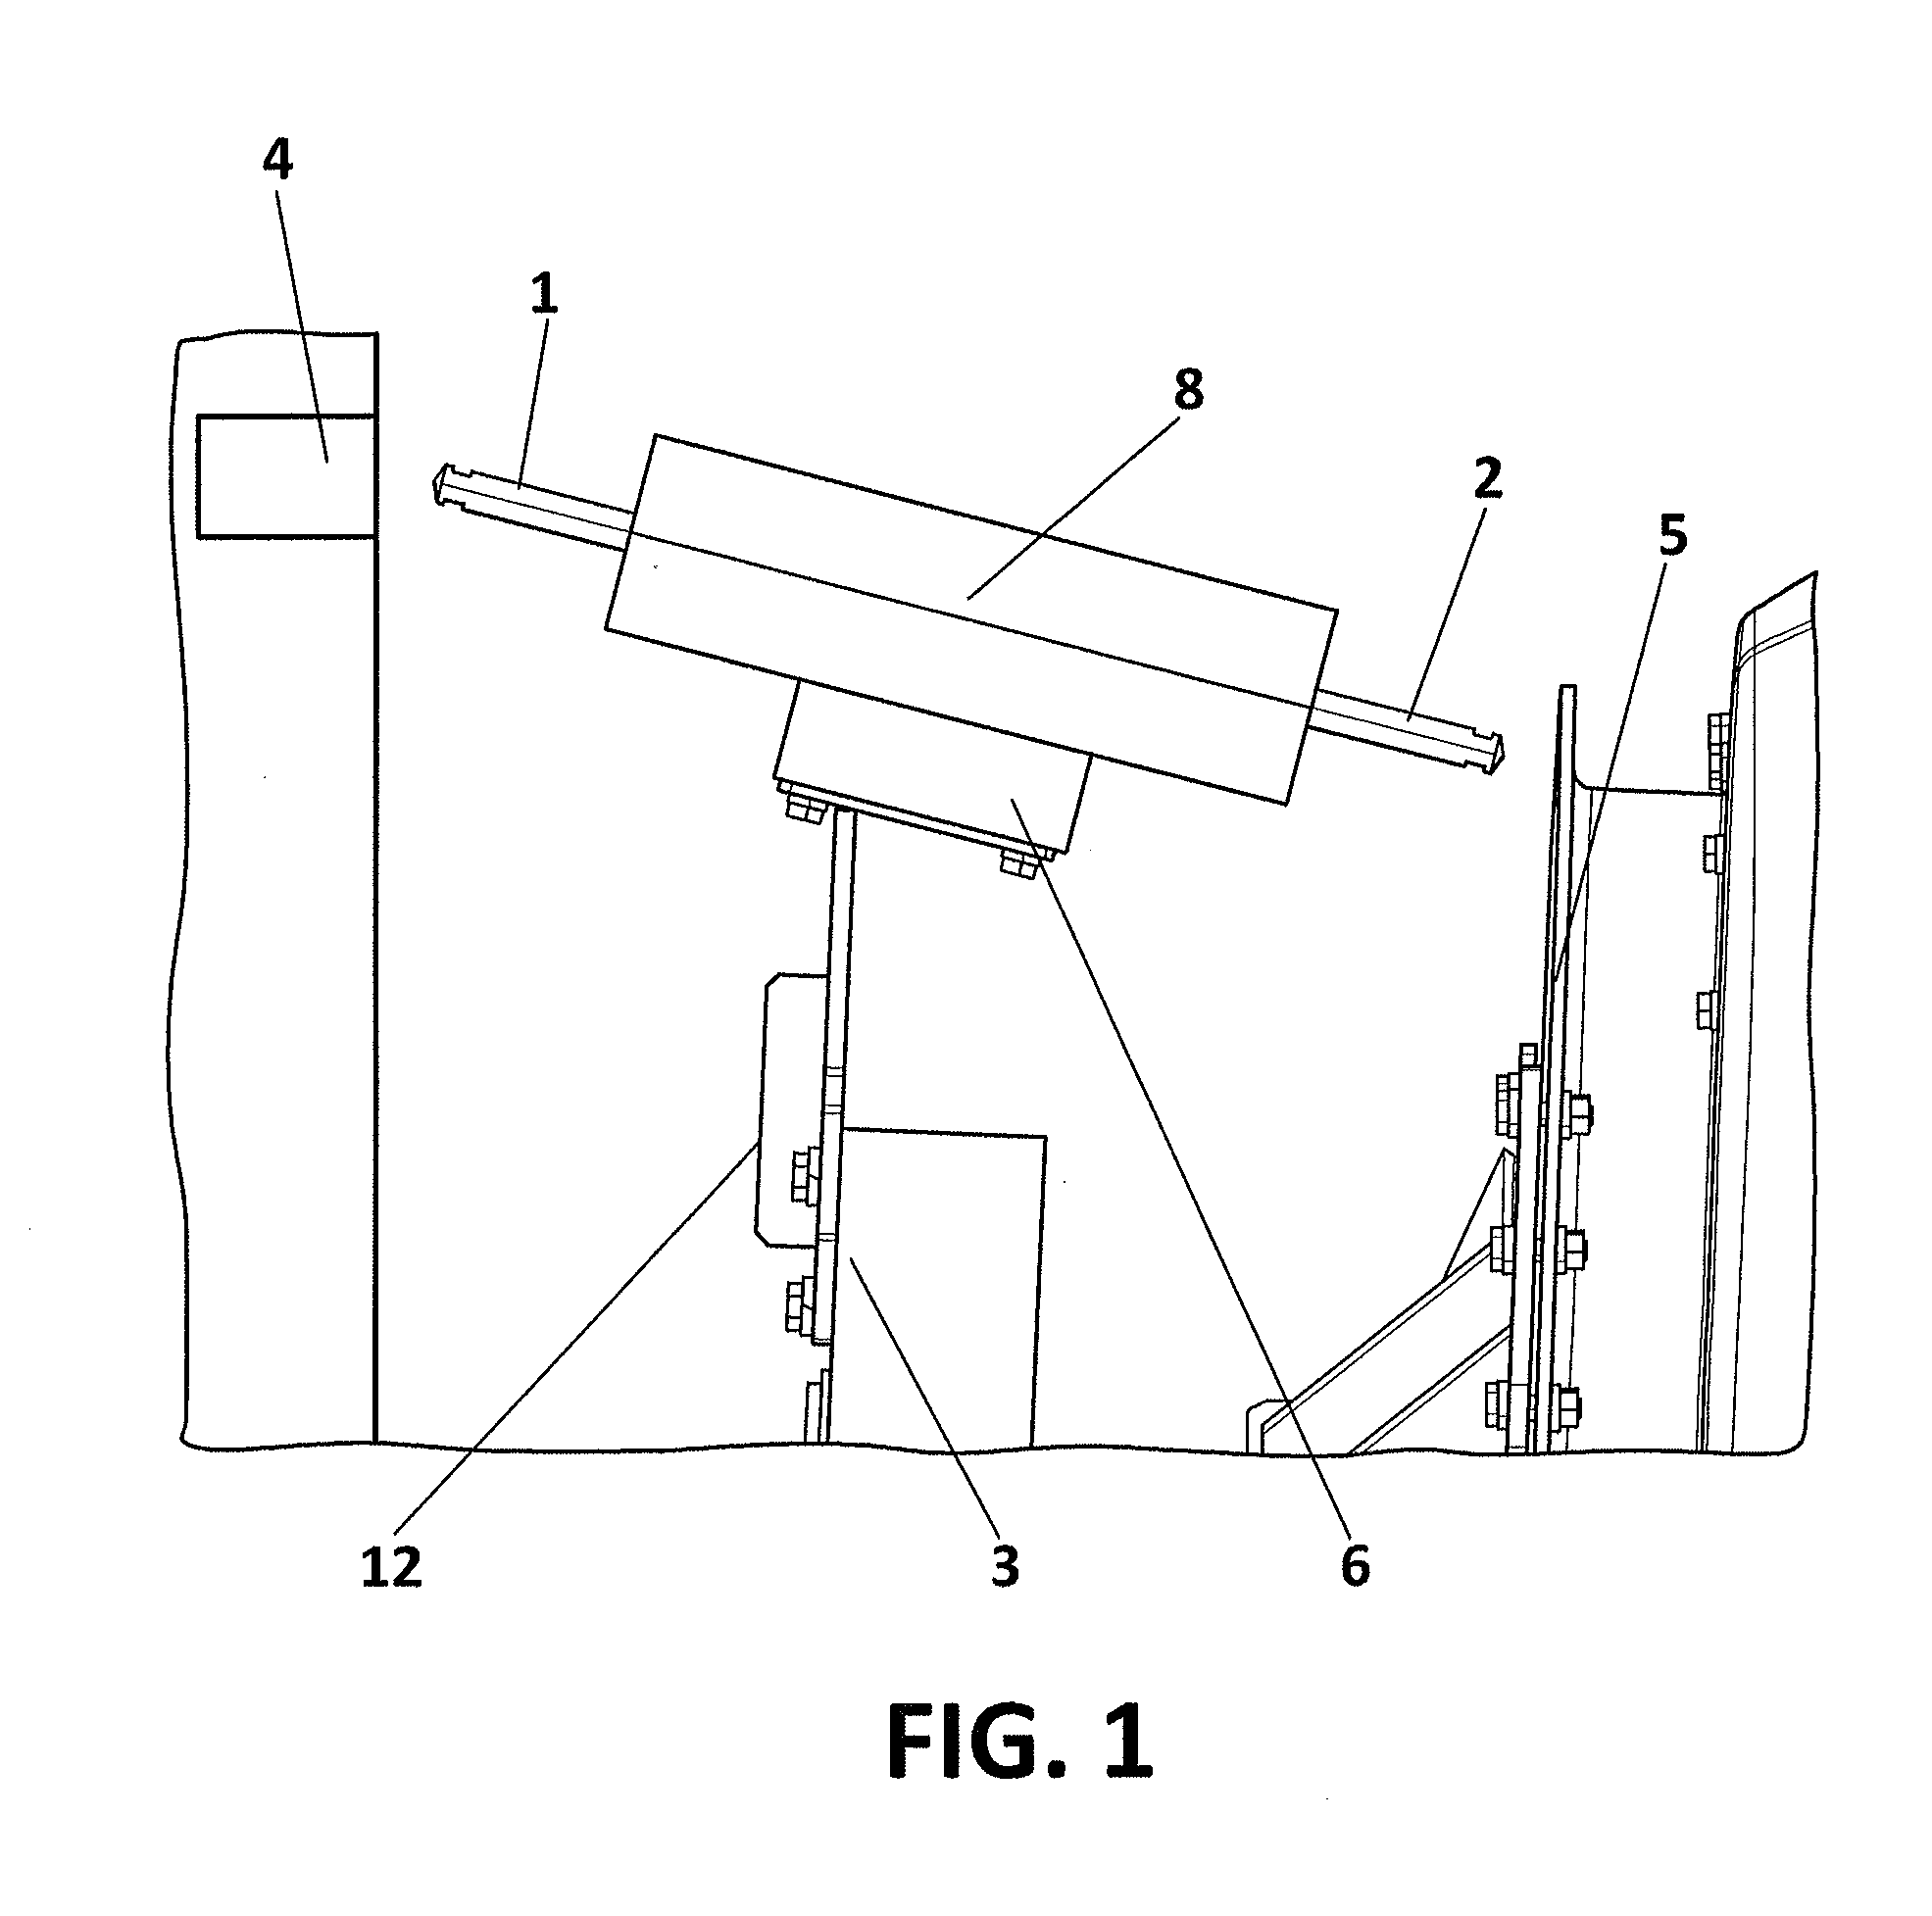 Lightning transmission device between the rotor and the nacelle in a wind turbine